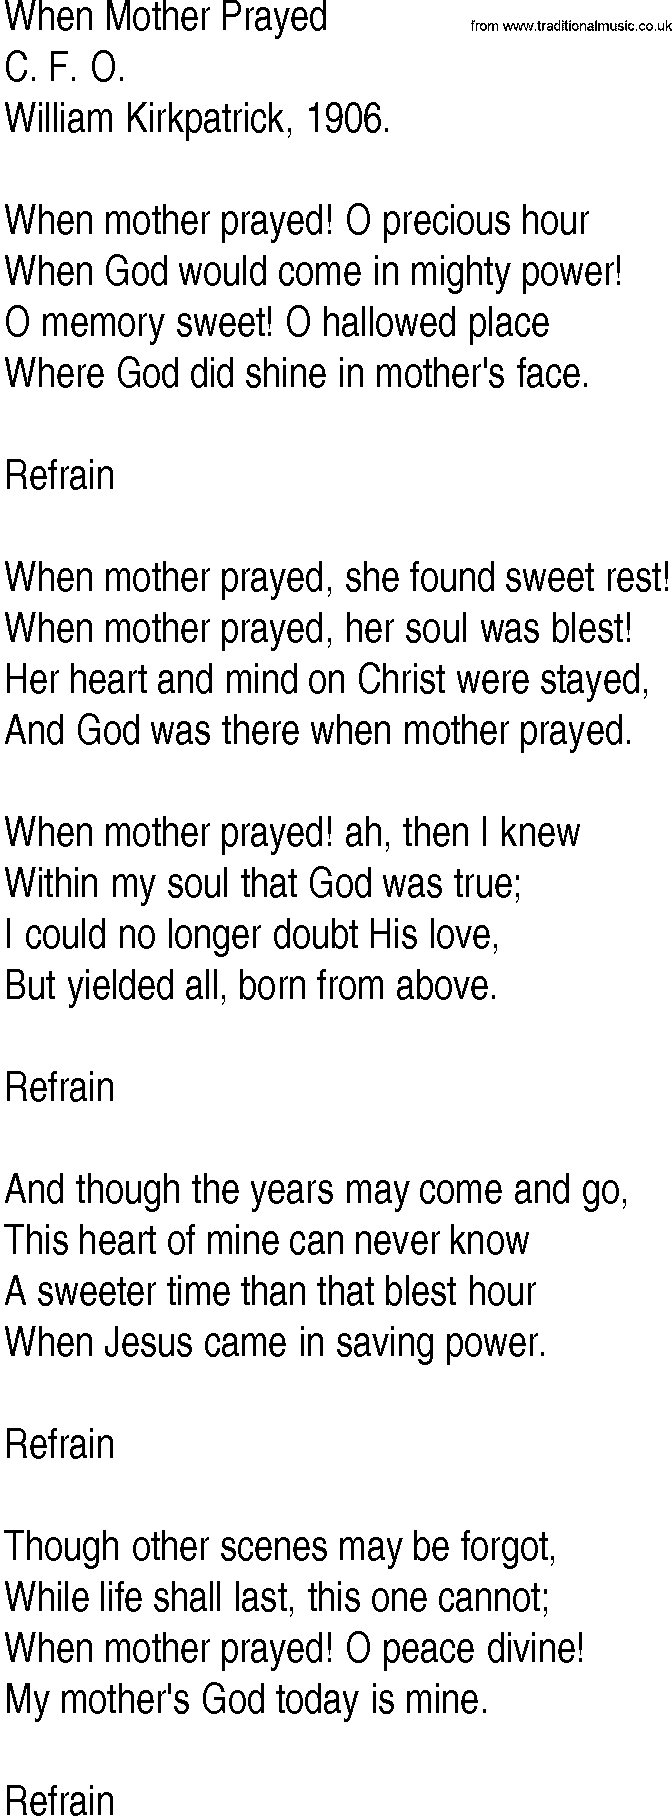 Hymn and Gospel Song: When Mother Prayed by C F O lyrics